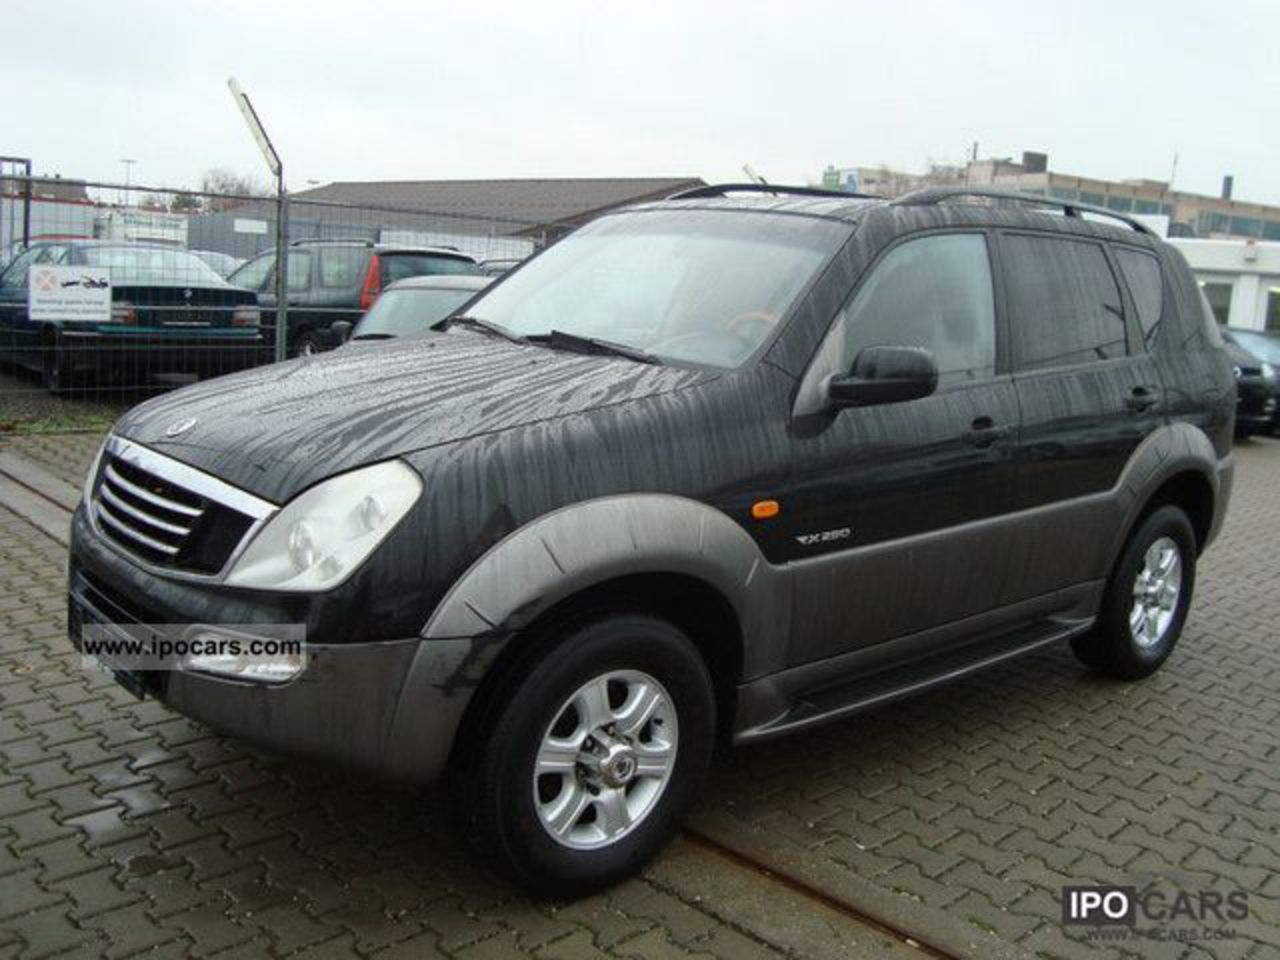 2004 Ssangyong Rexton RX 290 Automatic EURO 3 Off-road Vehicle/Pickup Truck